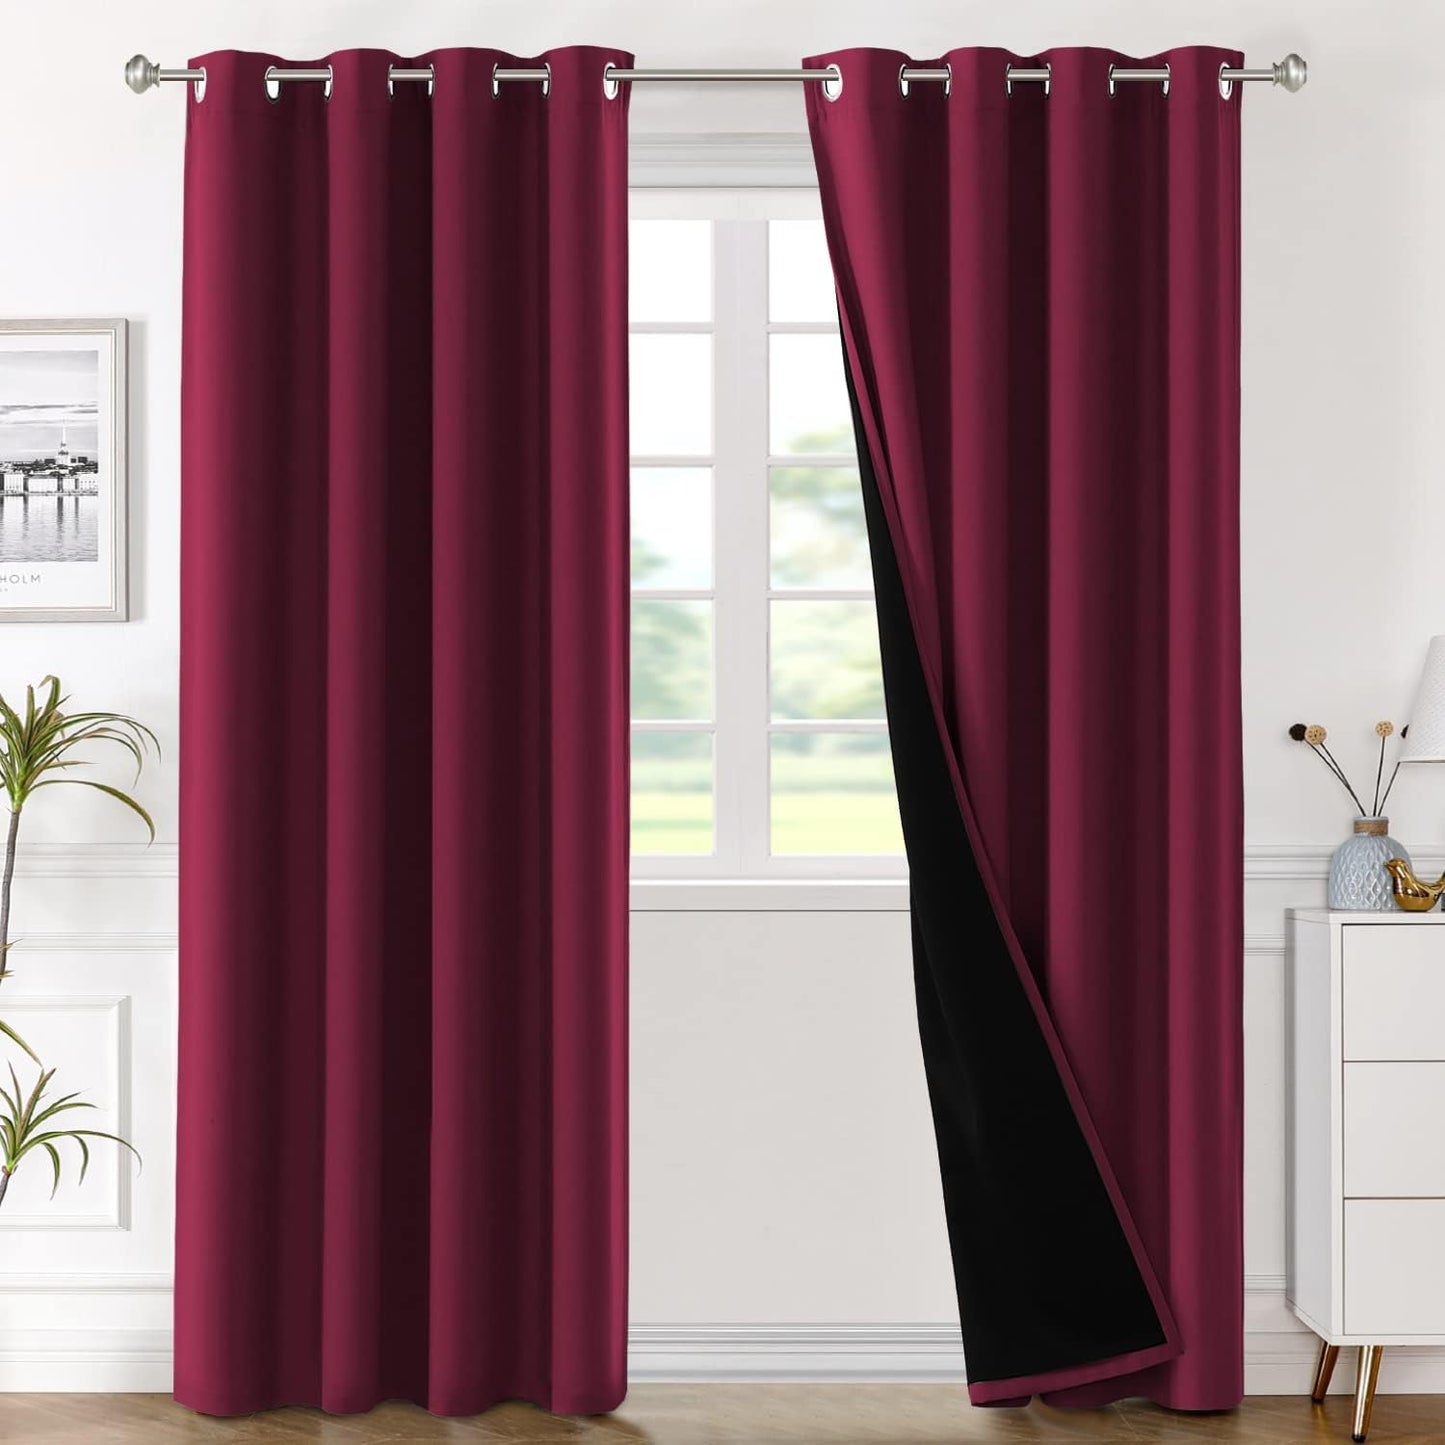 H.VERSAILTEX Blackout Curtains with Liner Backing, Thermal Insulated Curtains for Living Room, Noise Reducing Drapes, White, 52 Inches Wide X 96 Inches Long per Panel, Set of 2 Panels  H.VERSAILTEX Burgundy 52"W X 96"L 